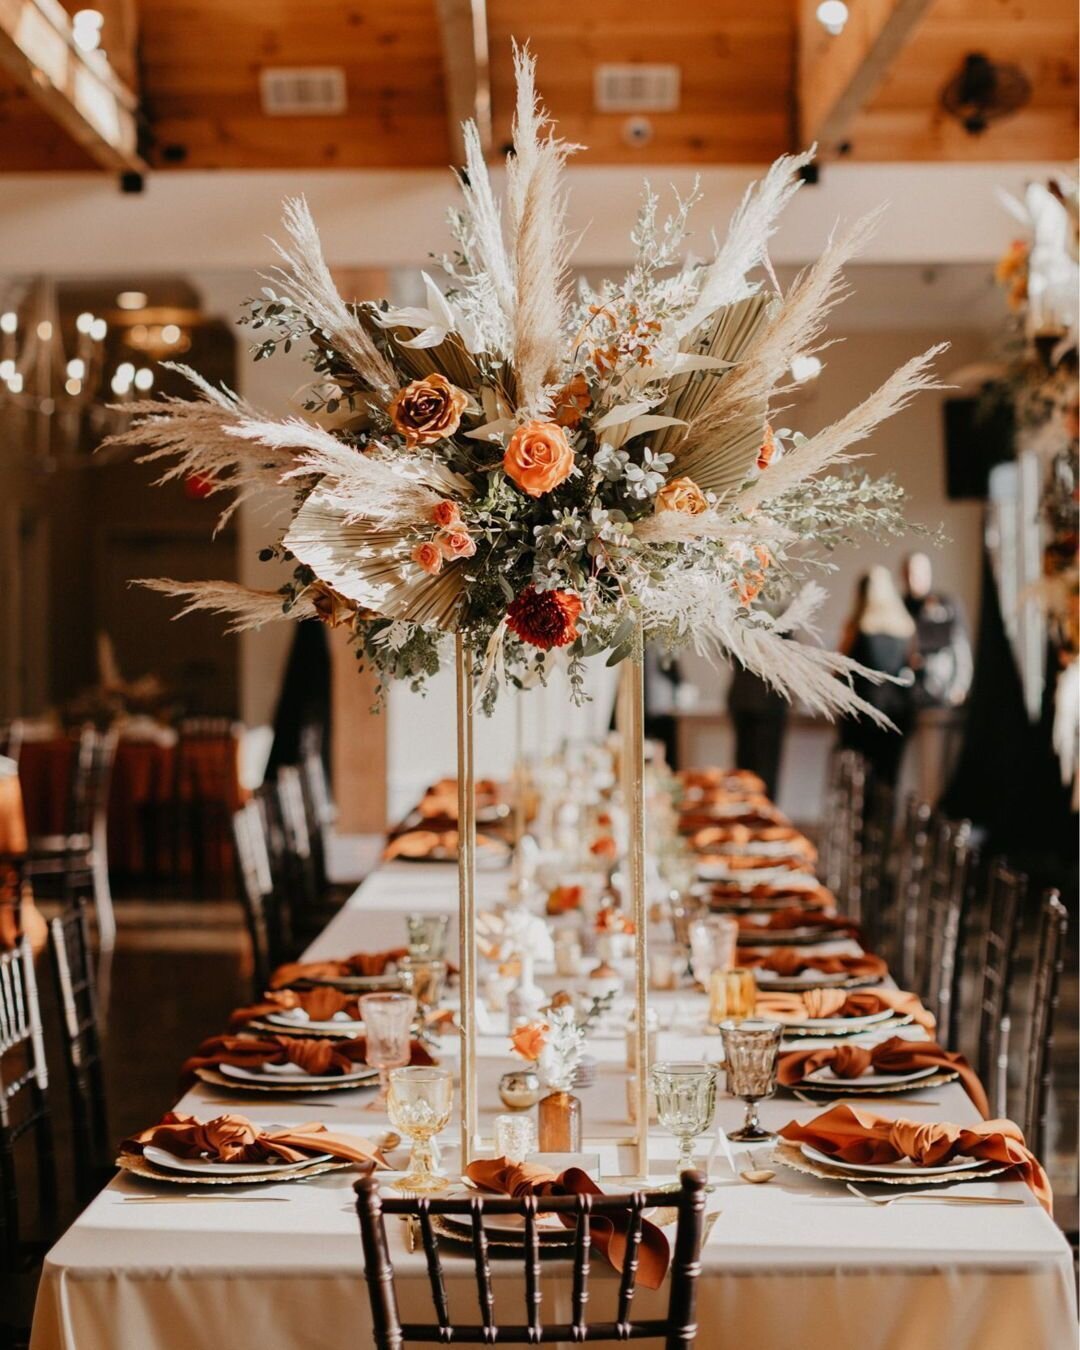 Love this boho vibe center piece! All the decorations were amazing &lt;3